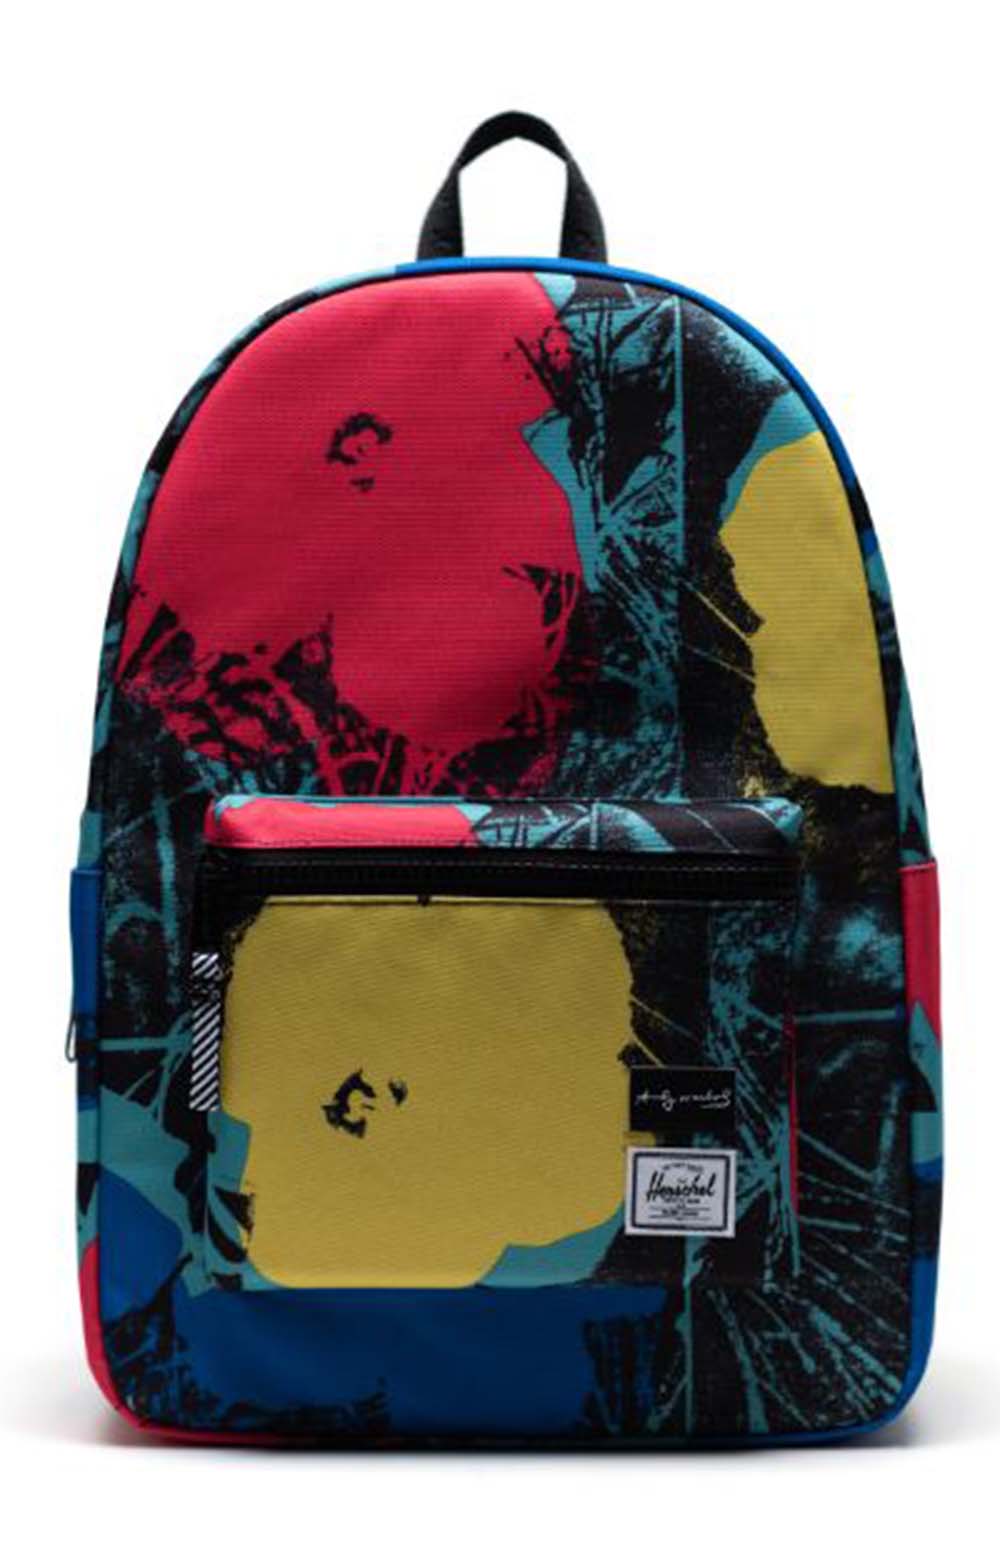 x Andy Warhol Eco Settlement Backpack - Flower